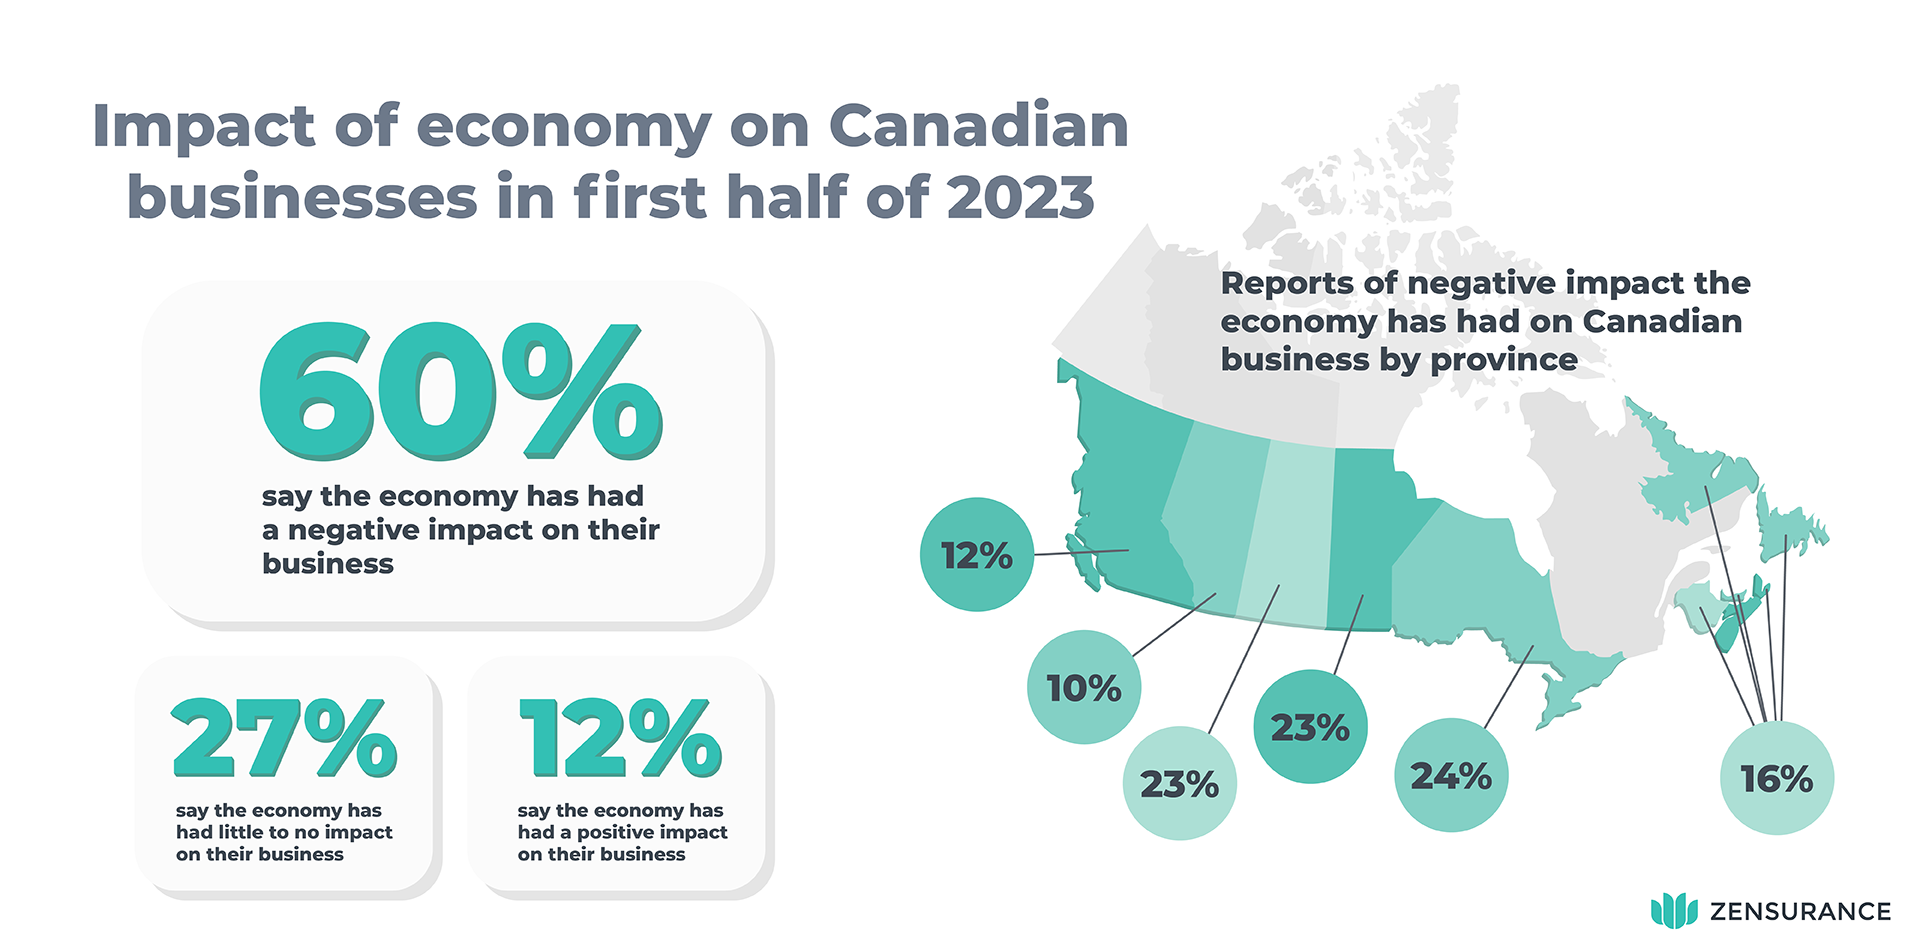 Impact of economy on Canadian business in first half of 2023